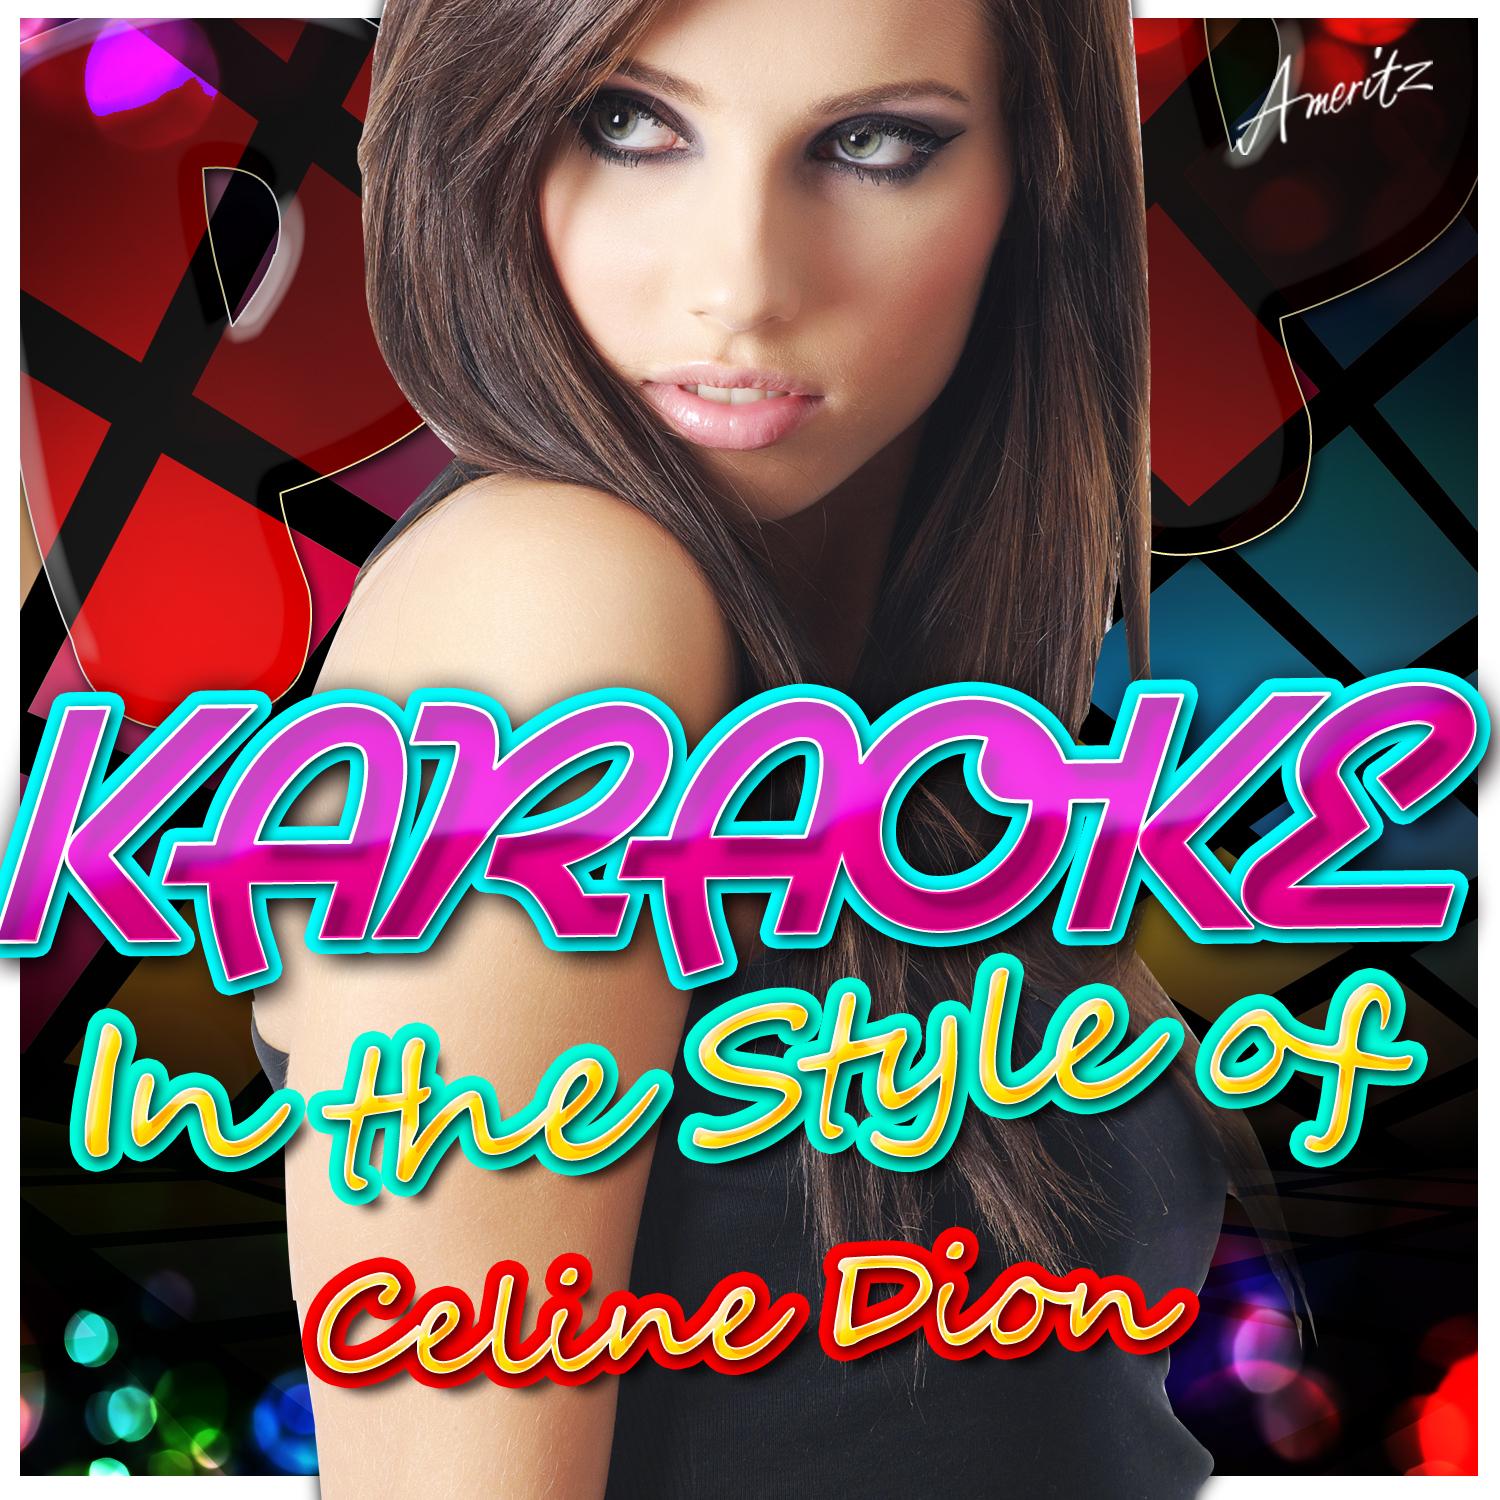 Love Can Move Mountains (In the Style of Celine Dion) [Karaoke Version]